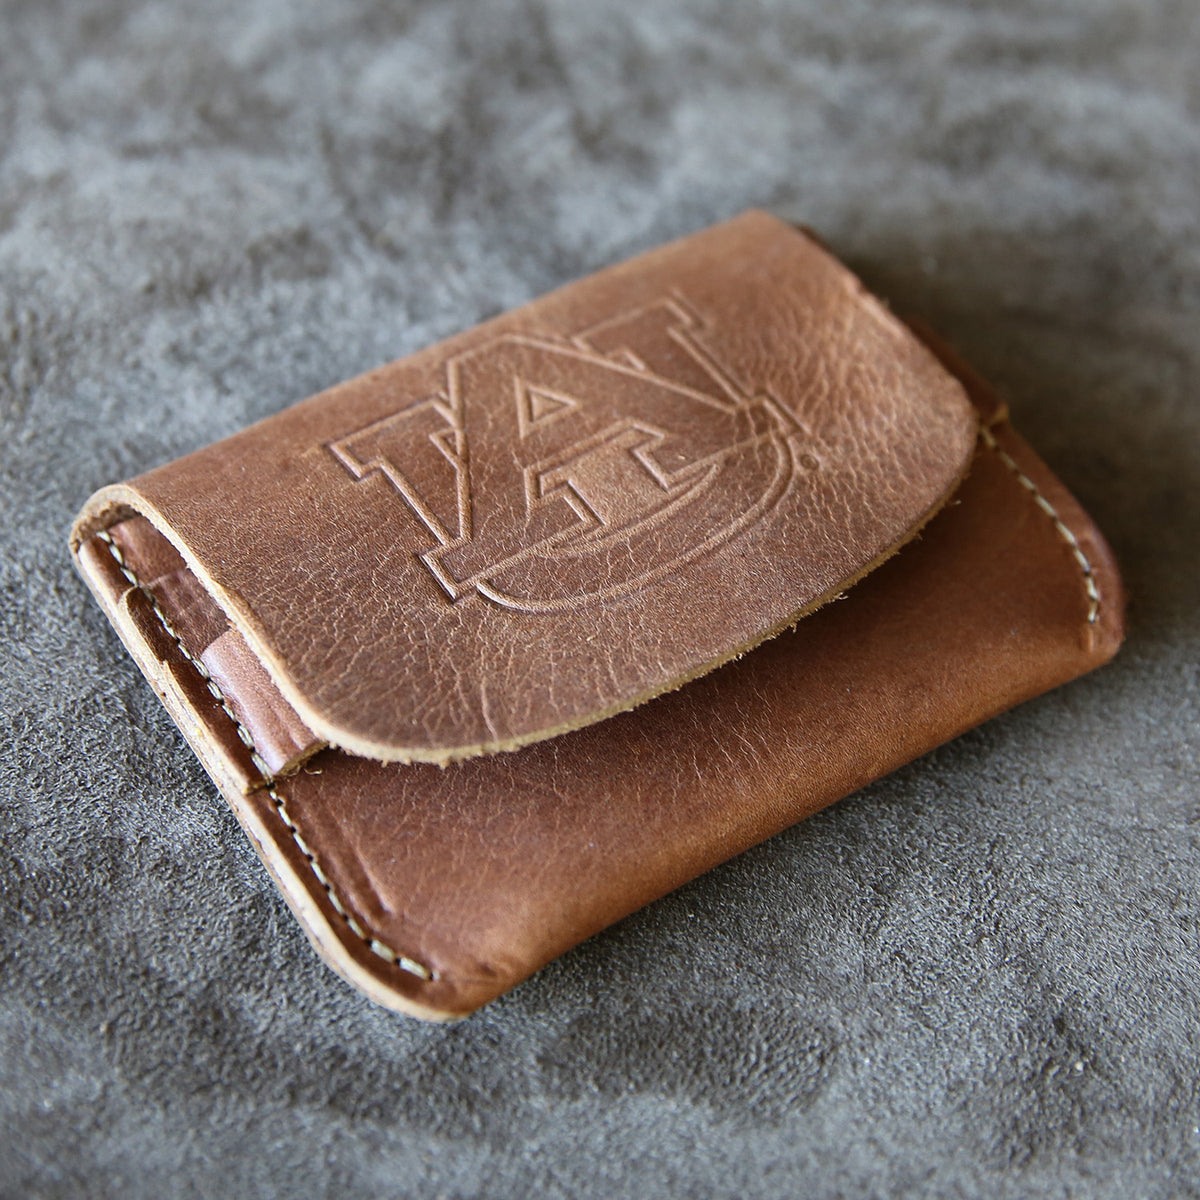 The Officially Licensed Auburn Fine Leather Front Pocket Wallet